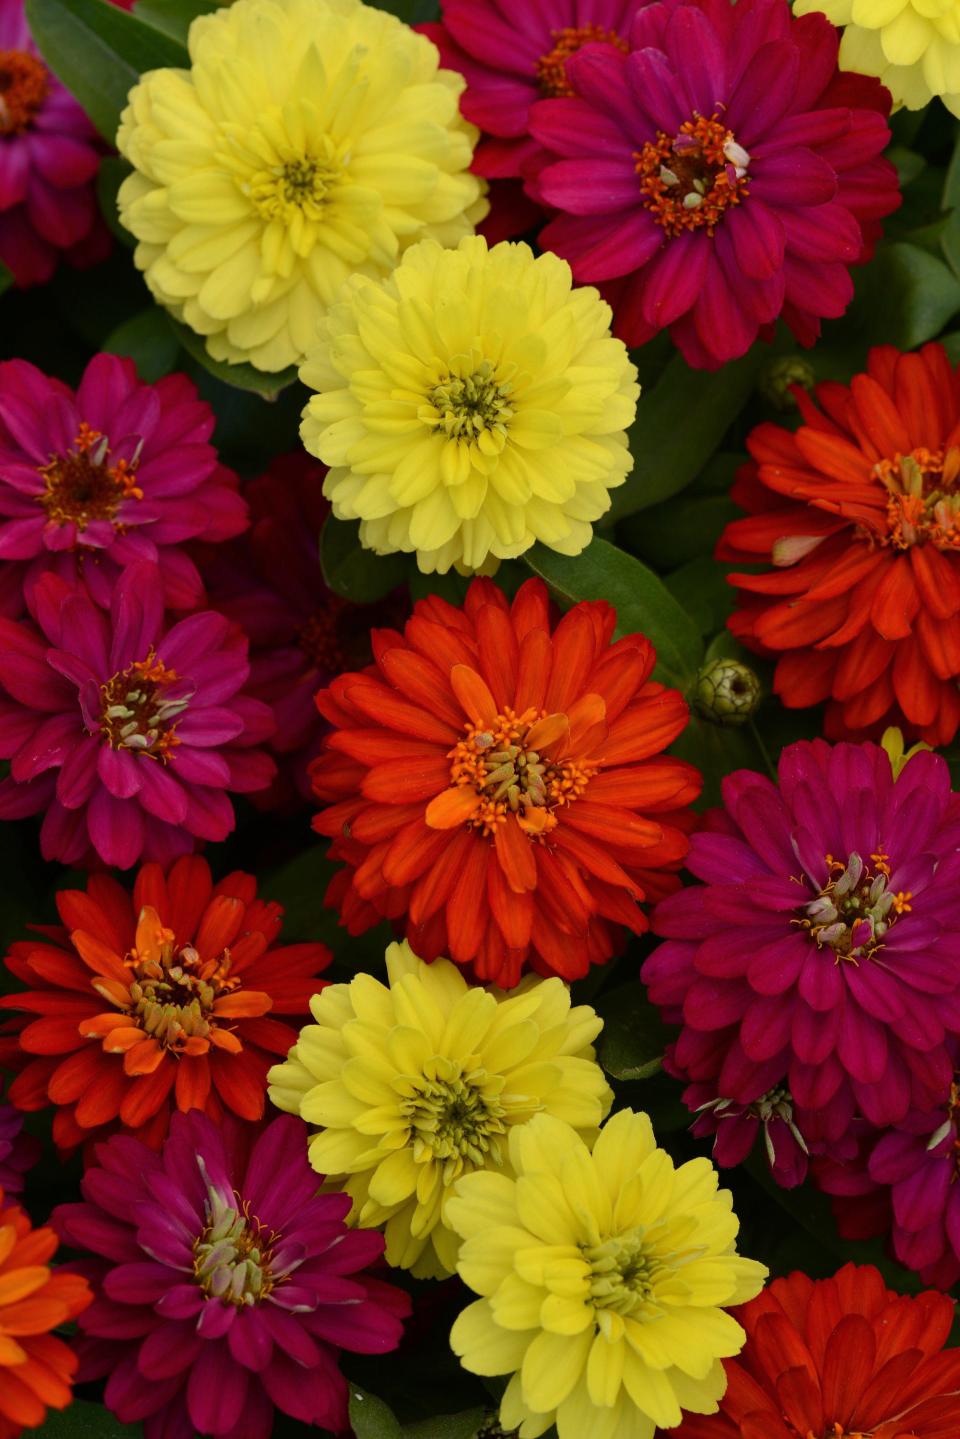 Double Zahara zinnias are a good deer-resistant flower for gardeners who struggle with the animals decimating their gardens.